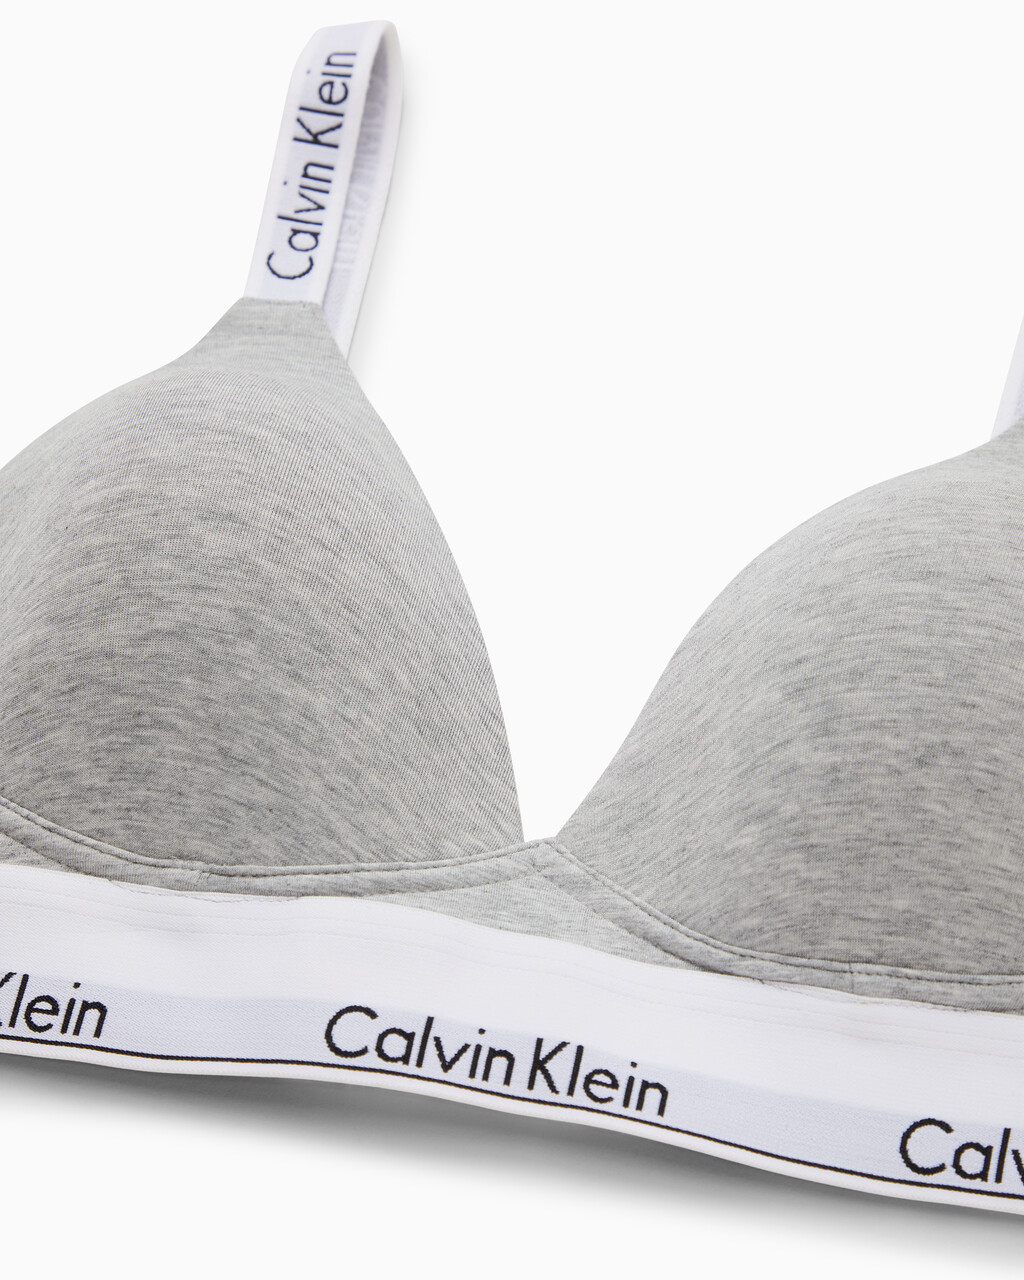 Calvin Klein Modern Cotton Unlined Triangle Bra Grey Heather QF1061-020 -  Free Shipping at Largo Drive